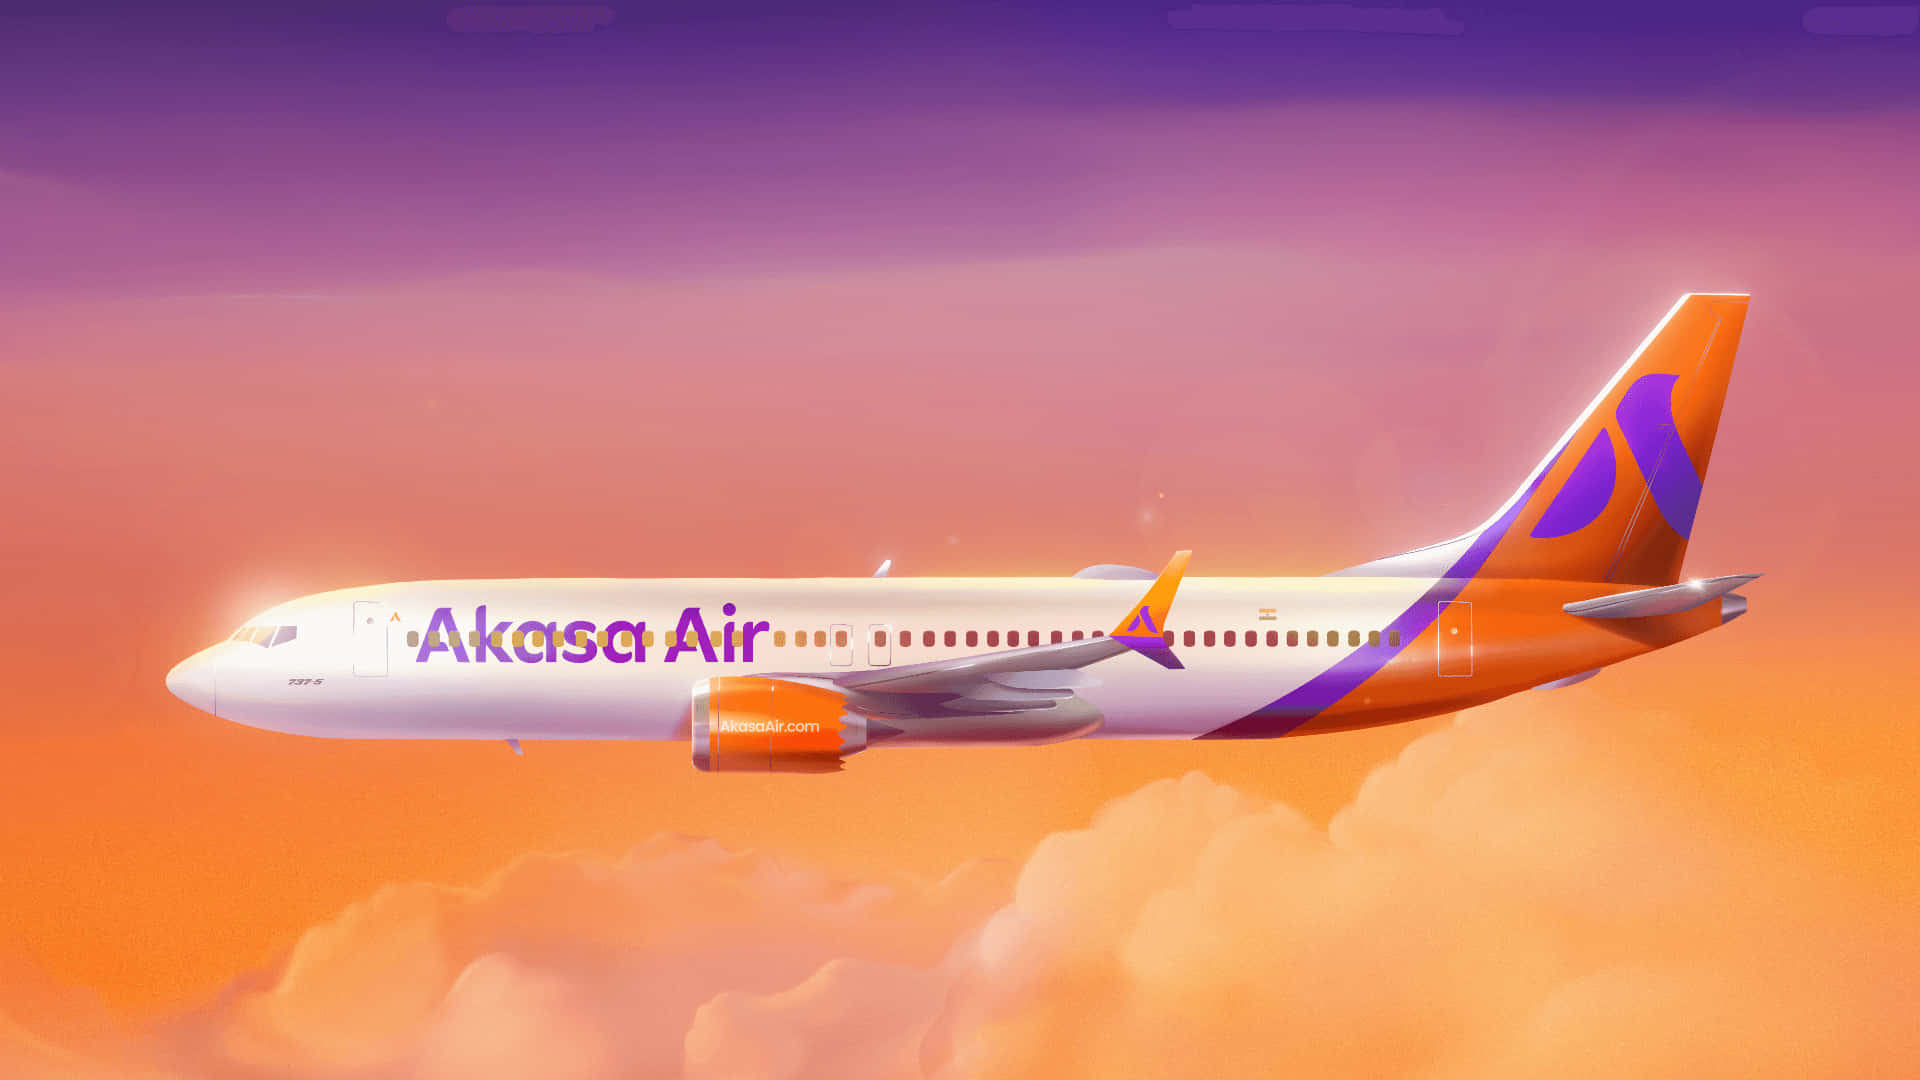 Soar through the air in style aboard a pink airplane. Wallpaper